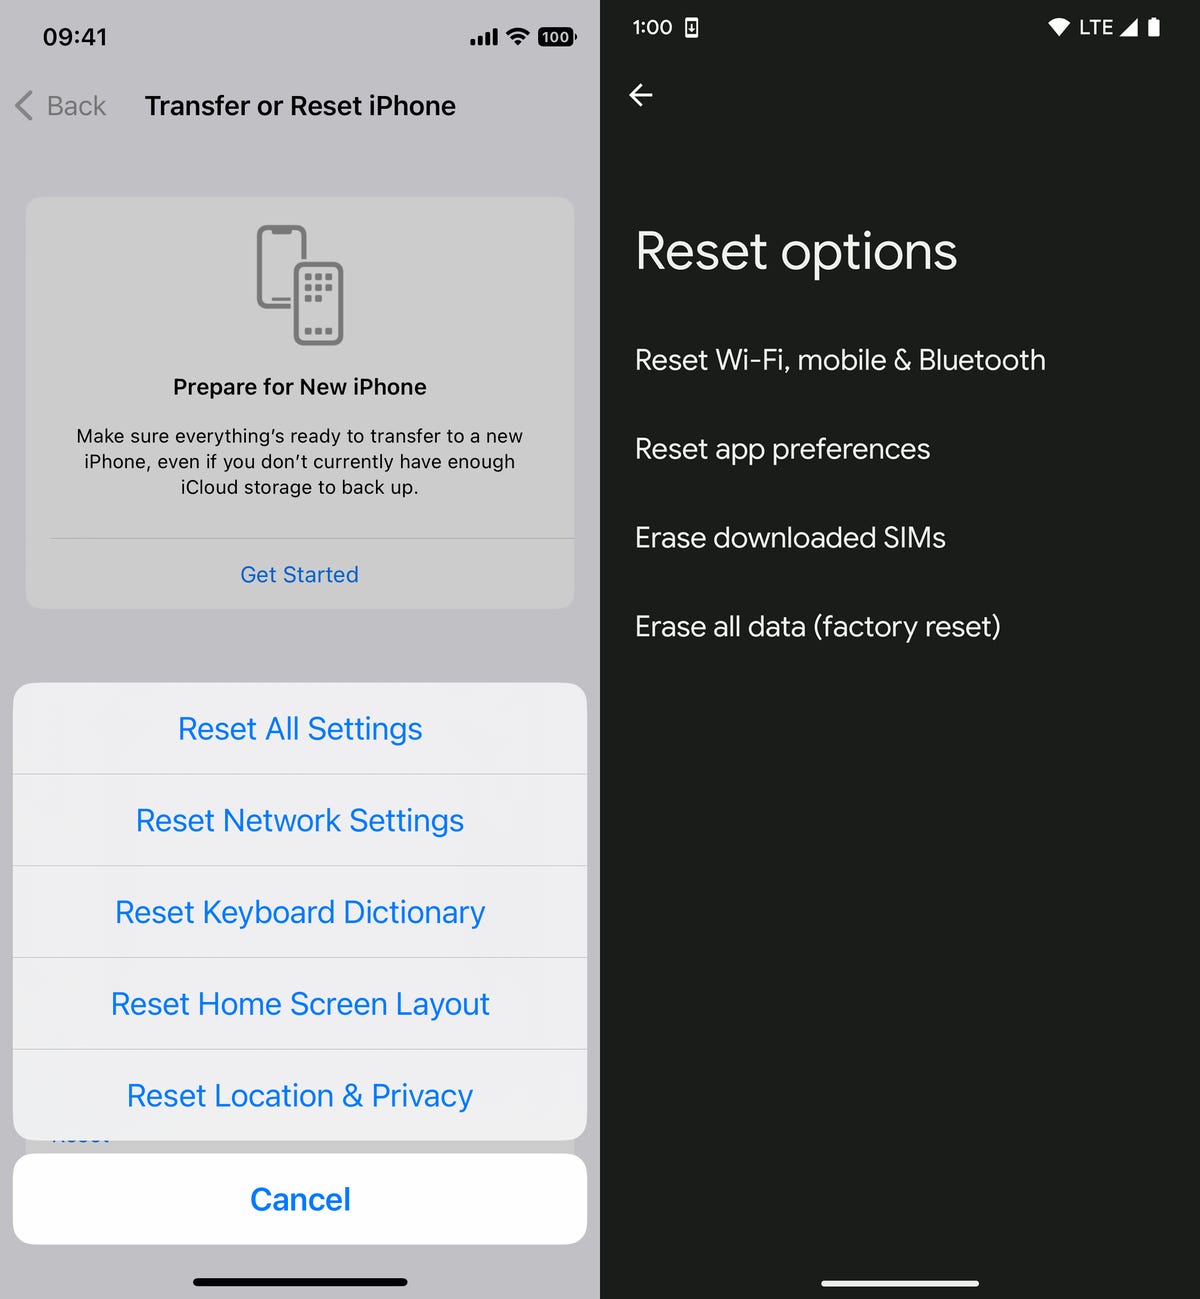 Network settings on iOS and Android